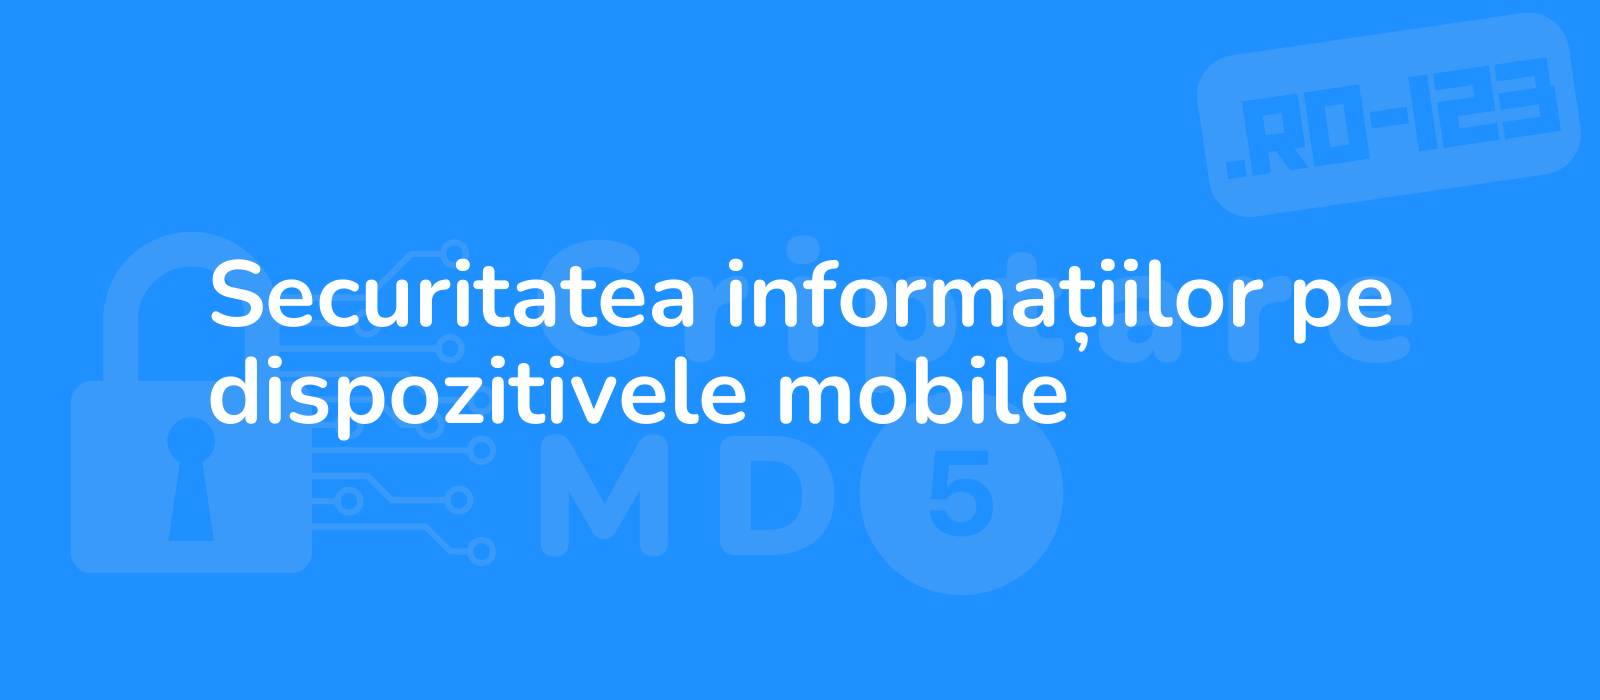 the representative image for the title securitatea informatiilor pe dispozitivele mobile could be described as modern mobile devices with security lock symbol ensuring data protection and privacy minimalist design